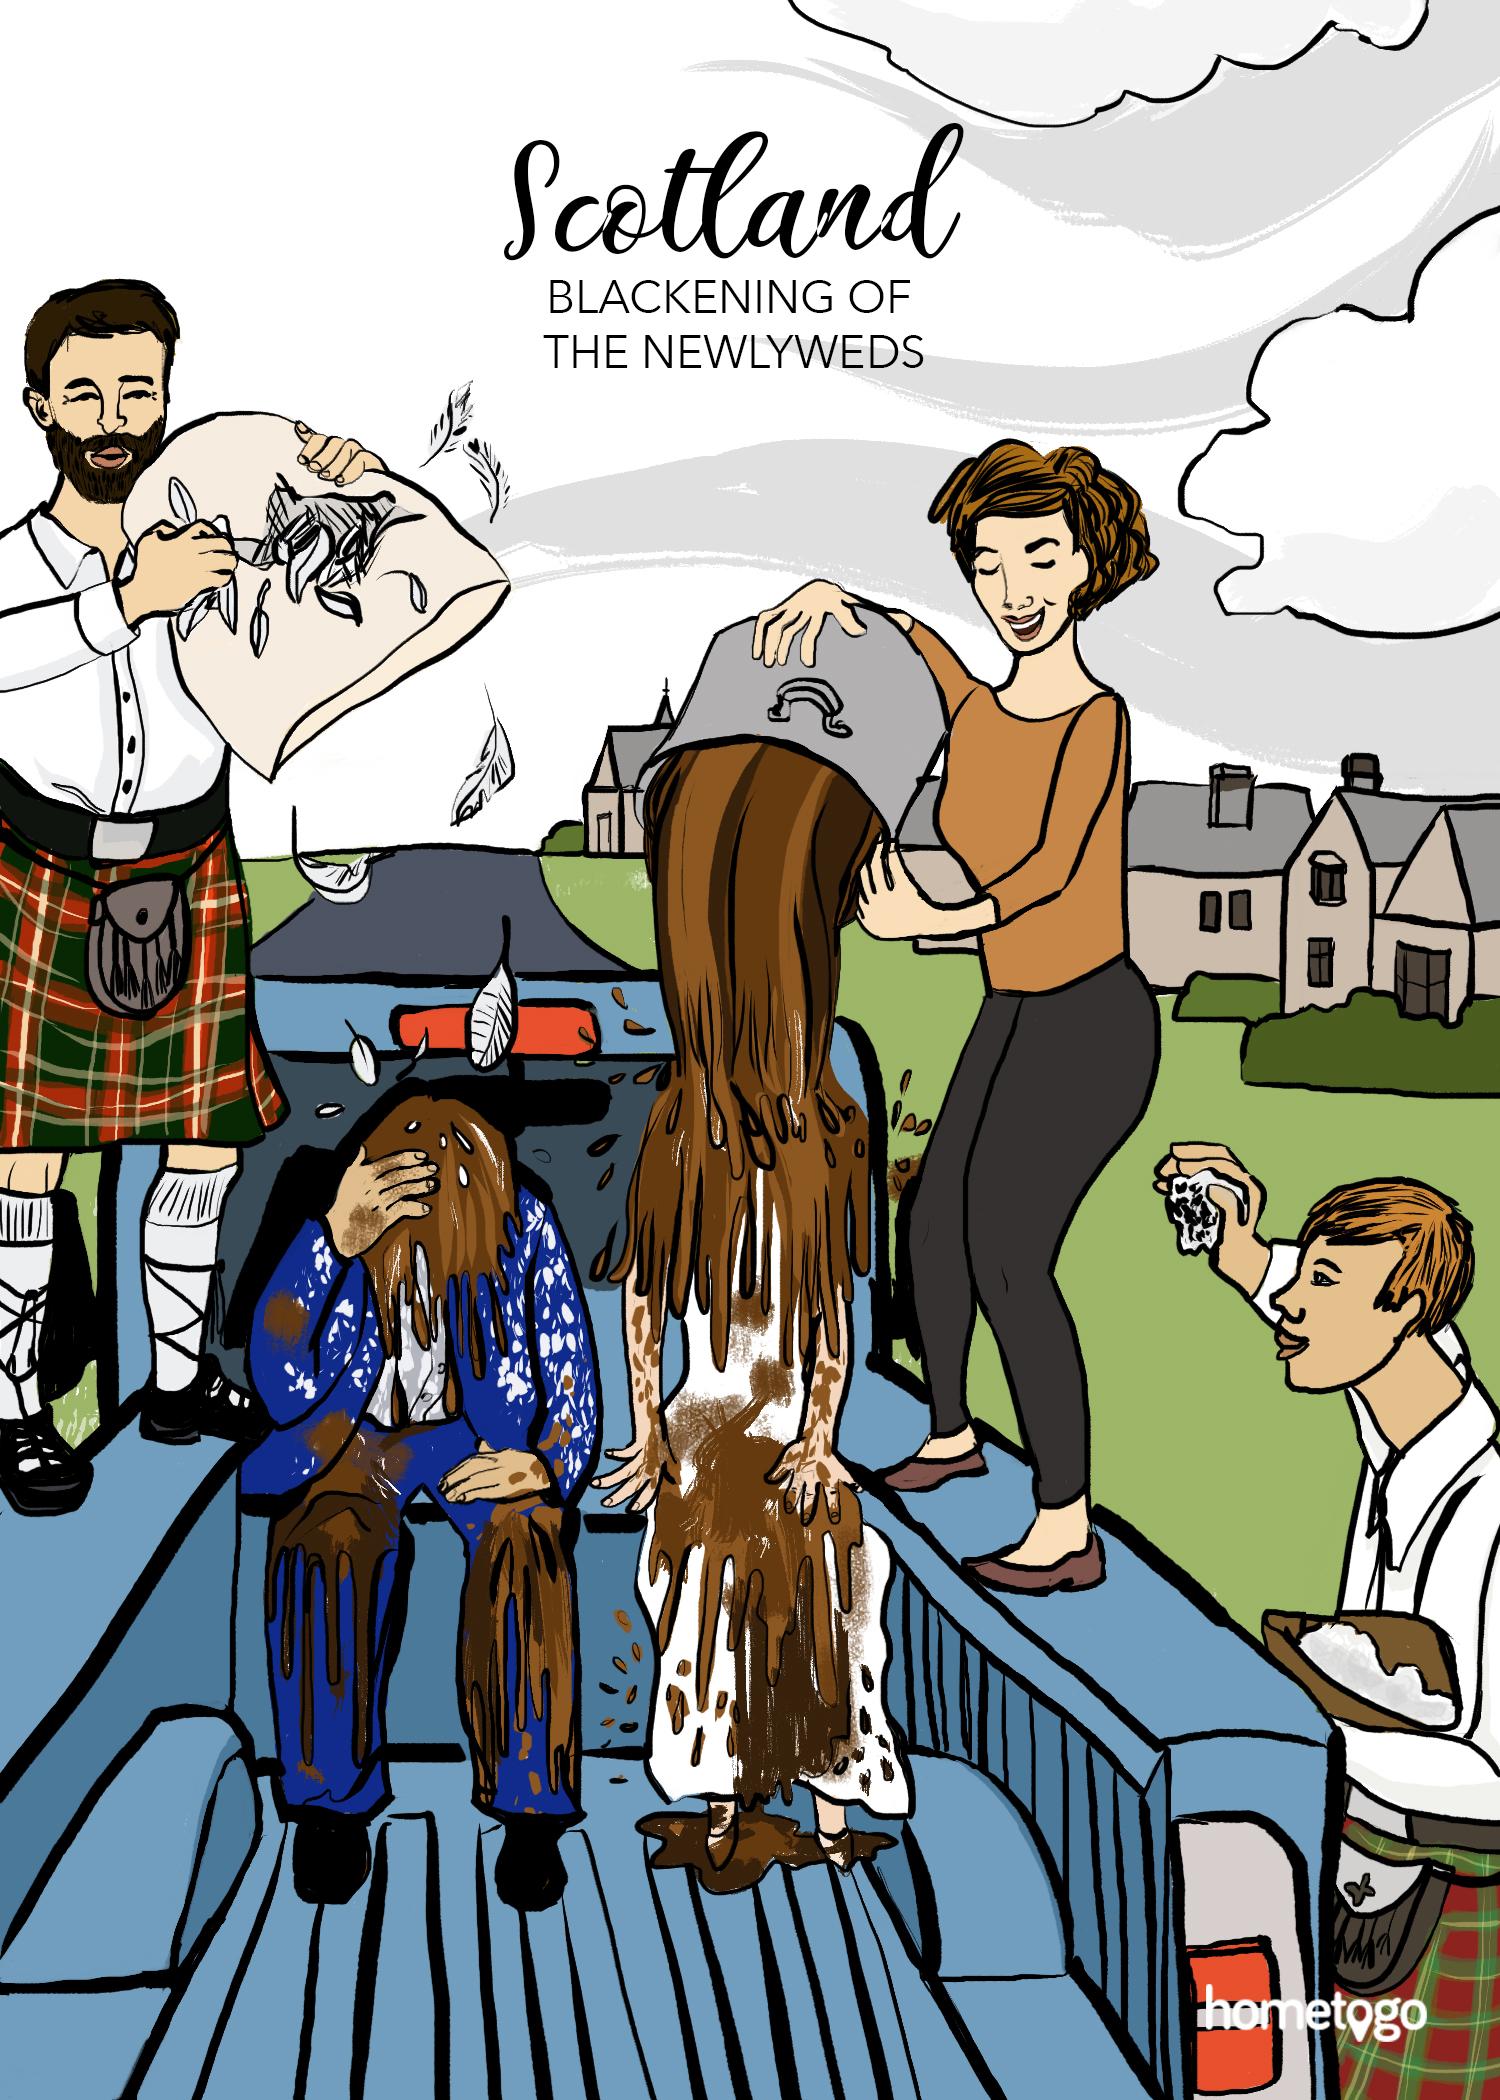 Illustration featuring the wedding custom from Scotland, where the groom and the bride get thrown dirt before the wedding